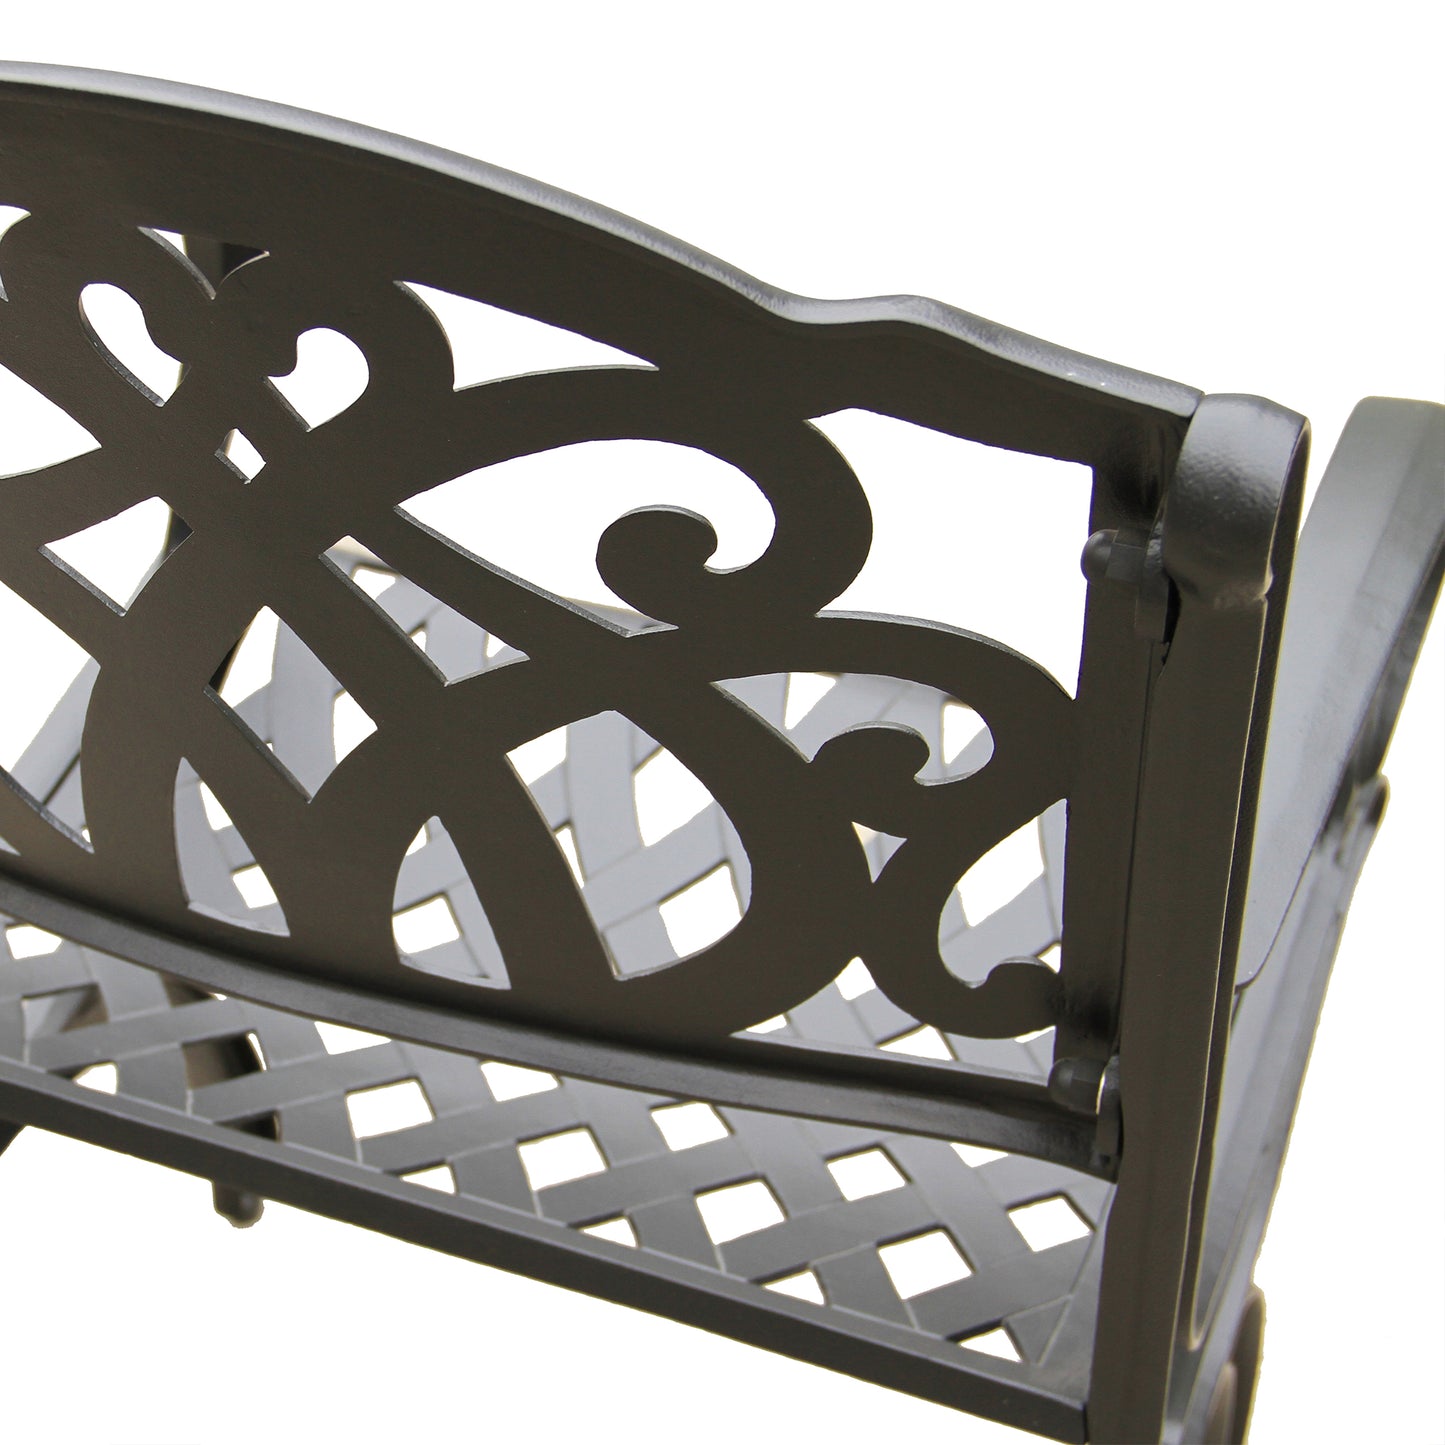 Ornate Traditional Outdoor Cast Aluminum Patio Dining Chair